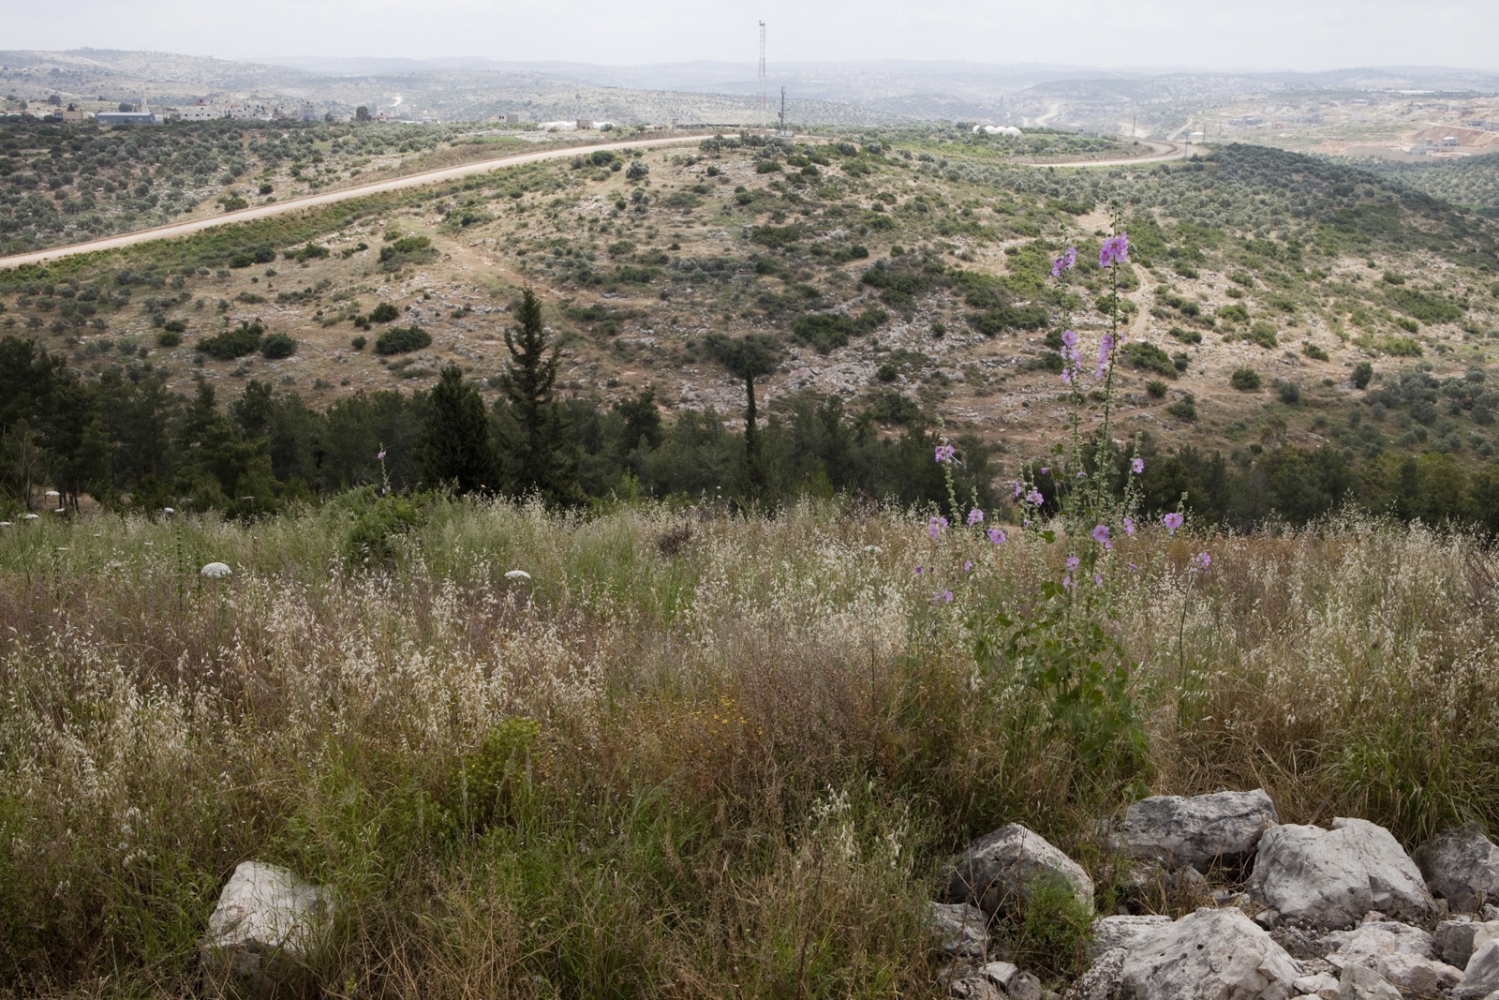  The view looking east across the West Bank from Hezi observation point - a popular barbecue spot for Israelis at the weekend. The Green Line runs along the valley bottom right to left, as the separation barrier (the track & fence running across the hill opposite) snakes out into the West Bank in the distance. 